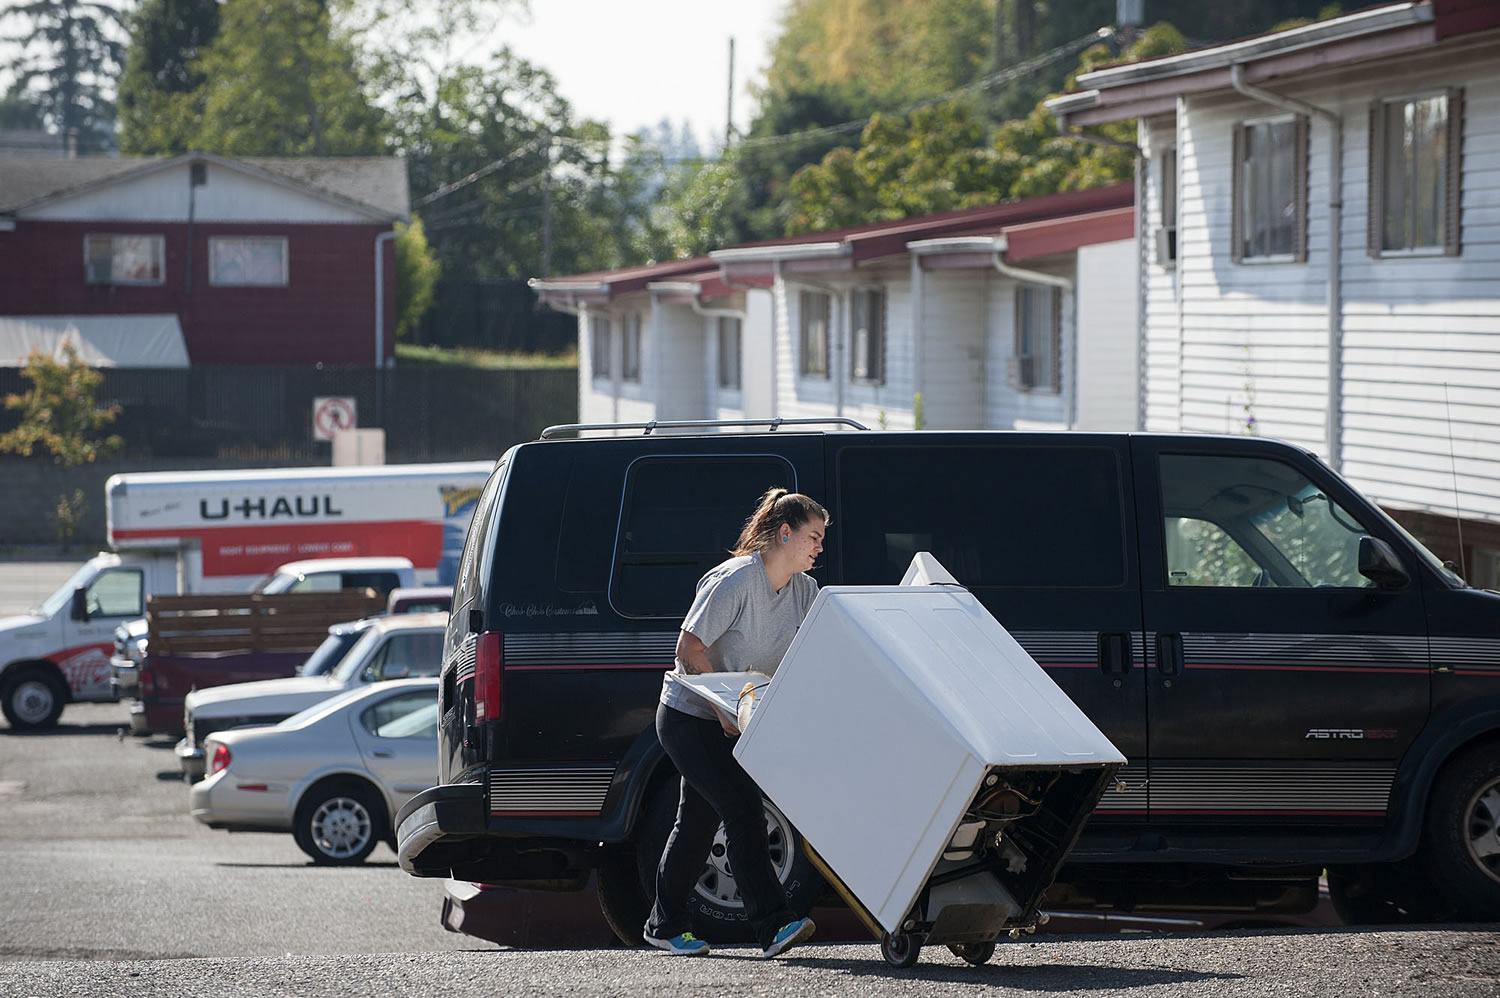 Ghim Village resident Tiffany Shepherd makes her way through the parking lot with her washer on Sept. 30. A friend who&#039;d borrowed the washer was moving out. Residents of the low-income complex were given 22 days notice to leave, forcing them to find new housing during a time of rising rents and low vacancy rates.